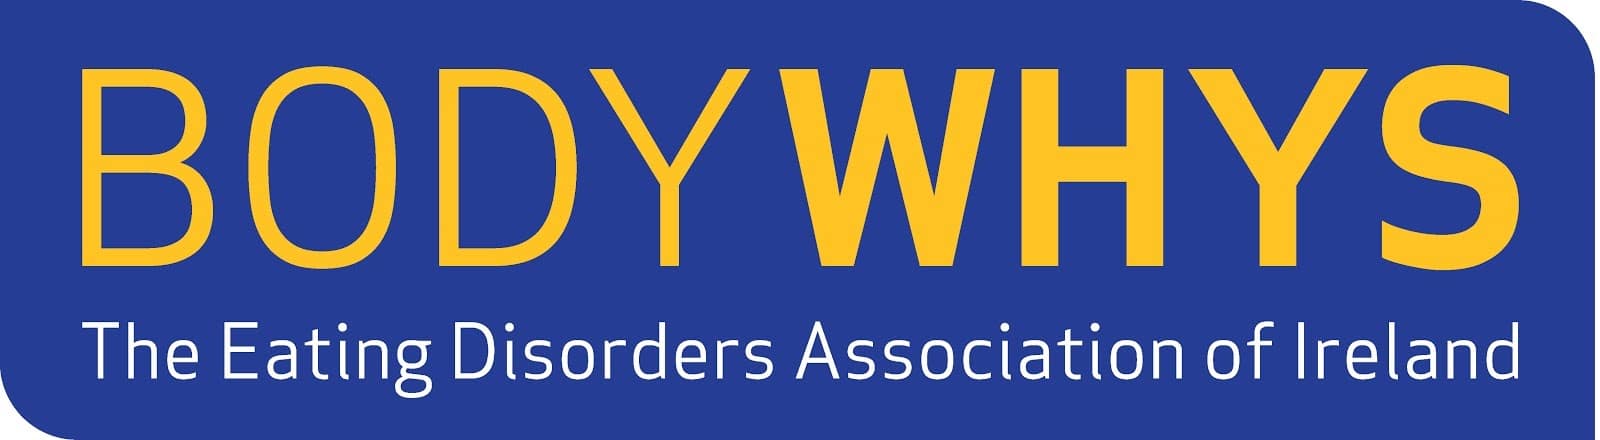 Bodywhys – The Eating Disorders Association of Ireland